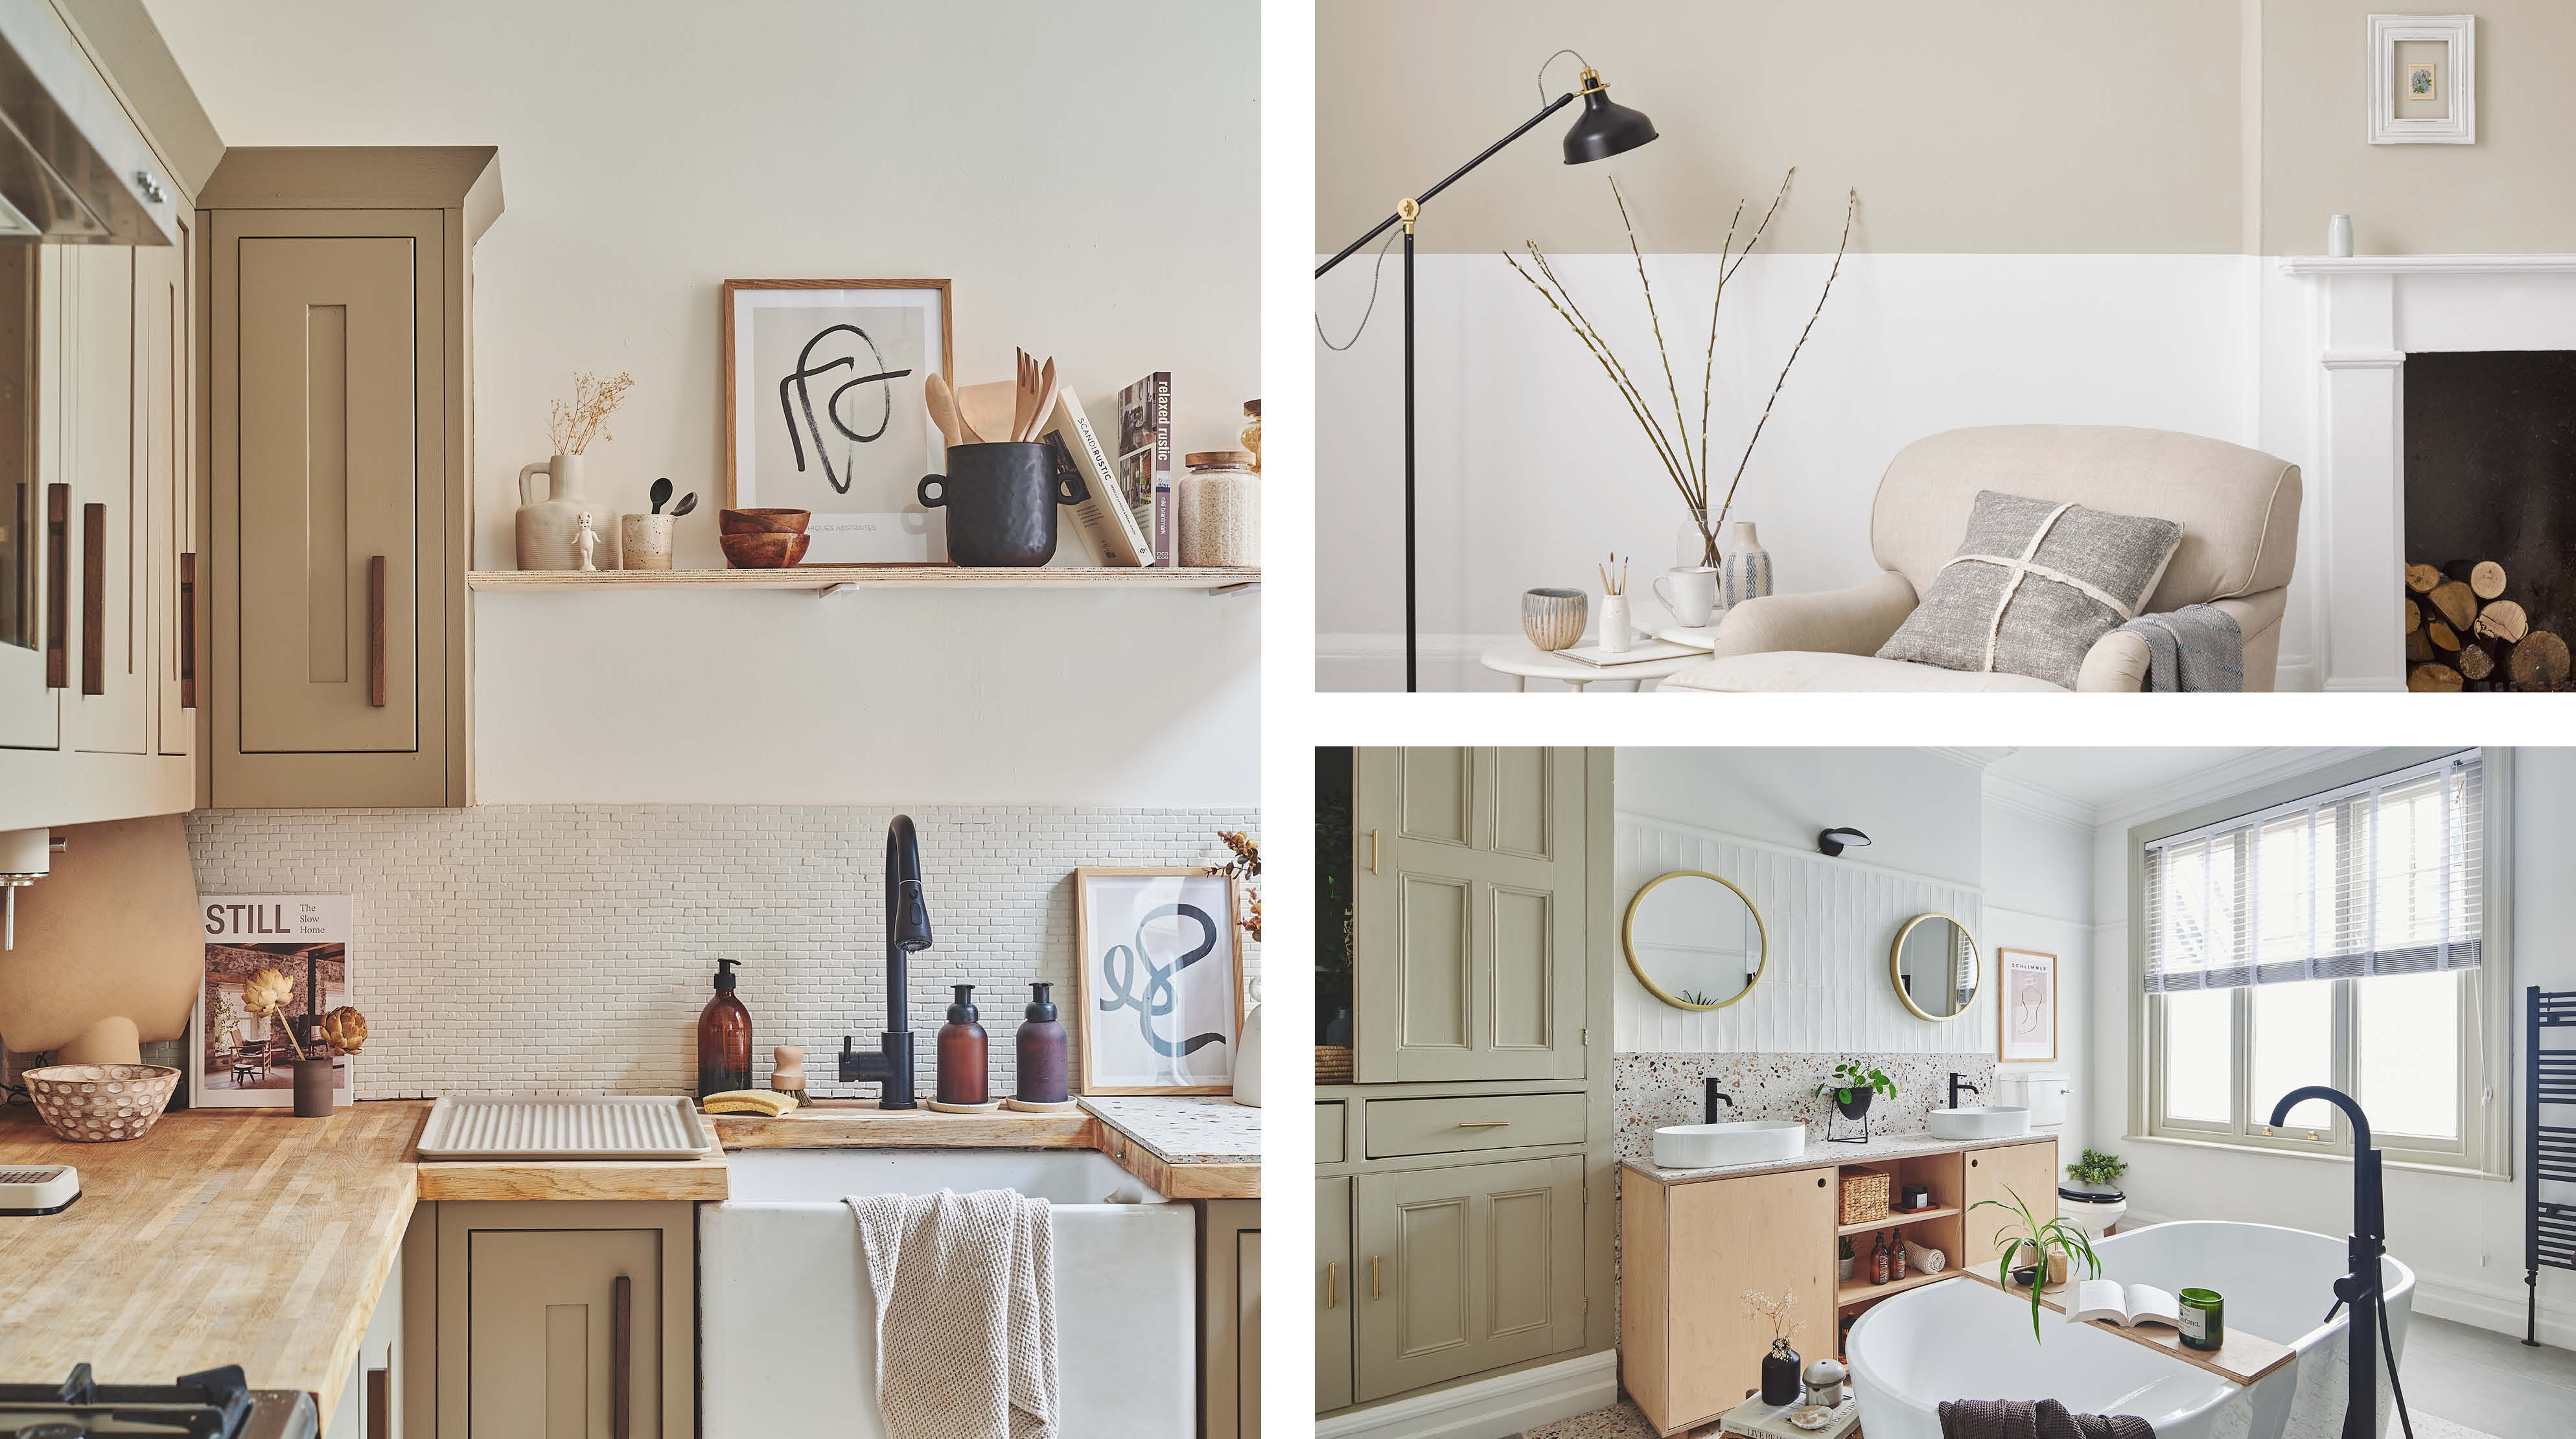 A kitchen painted in warm white Porcelain, tiles painted warm neutral Oyster. A lounge wall painted in white Cotton and neutral Hessian. A bathroom in Chalk White and earth toned neutral Half Light 